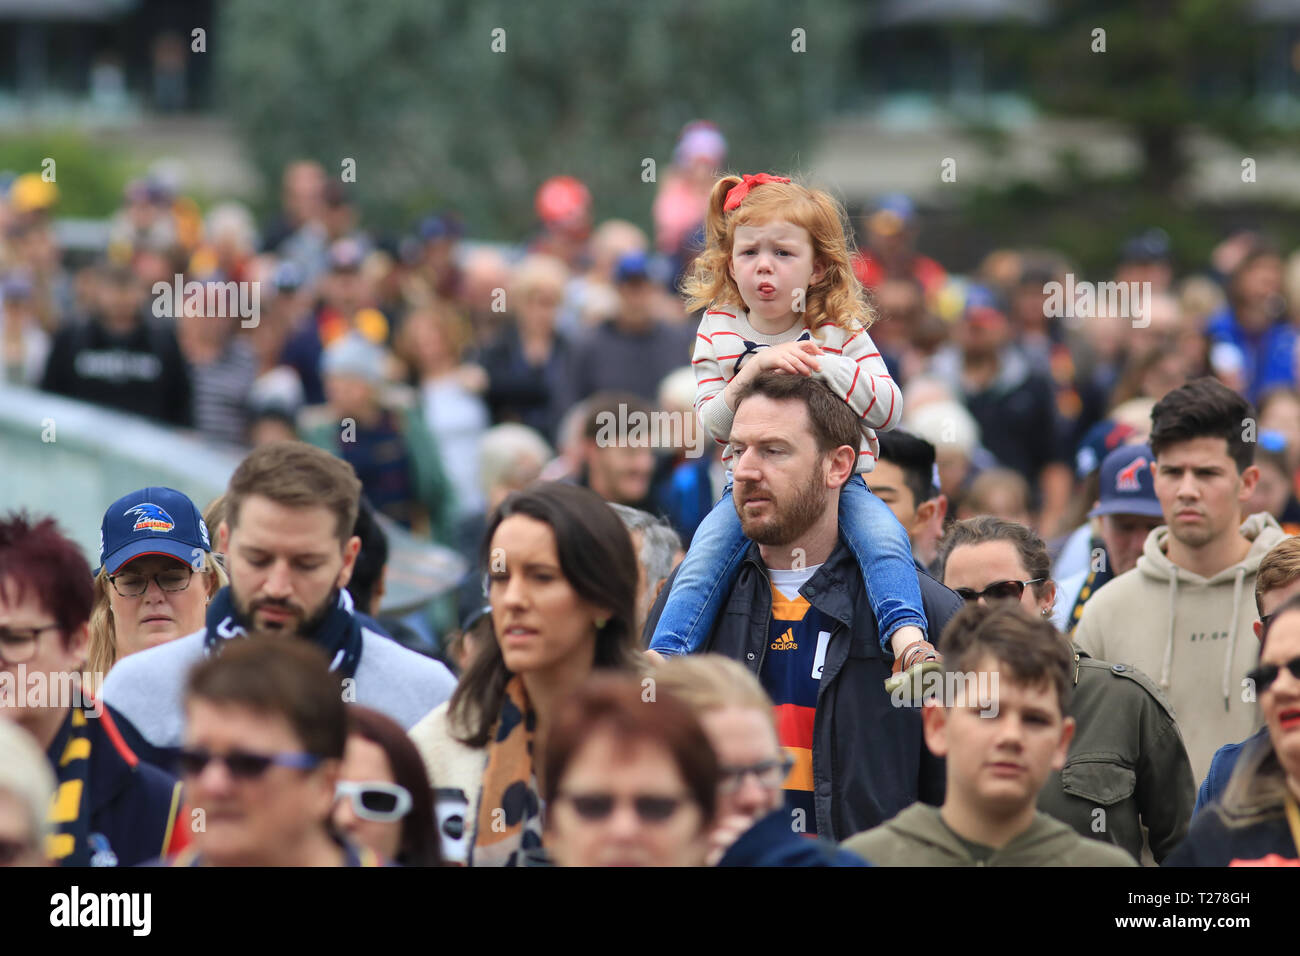 Adelaide Australia 31st March 2019.  Fans arrive at the Adelaide Oval for the 2019 AFL Women's Grand Final between Adelaide Crows and Carlton Football Club. The AFLW is an Australian rules football league for female players with the first season of the league began in February 2017 Credit: amer ghazzal/Alamy Live News Stock Photo